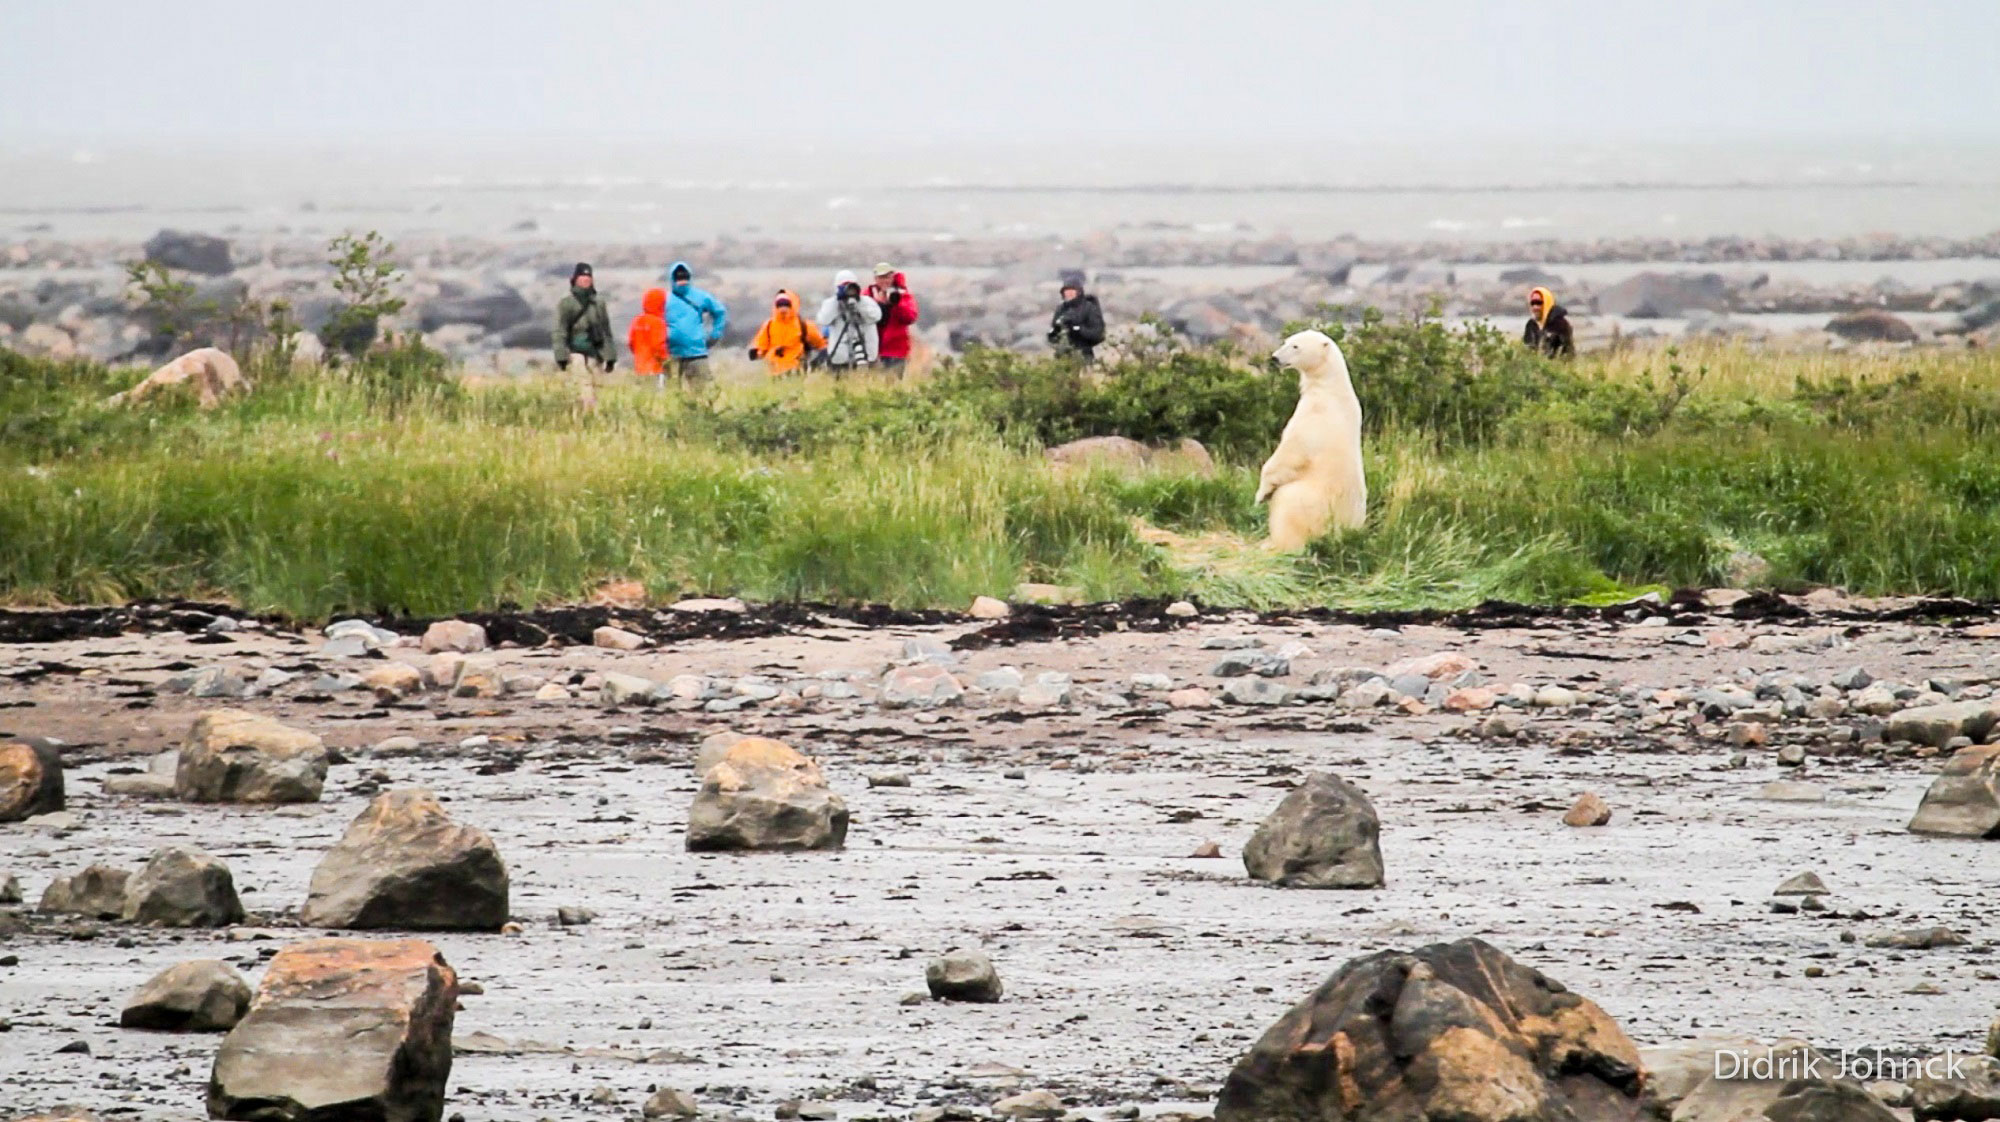 Polar bears and guests on the tundra. Seal River Heritage Lodge. Didrik Johnck photo.